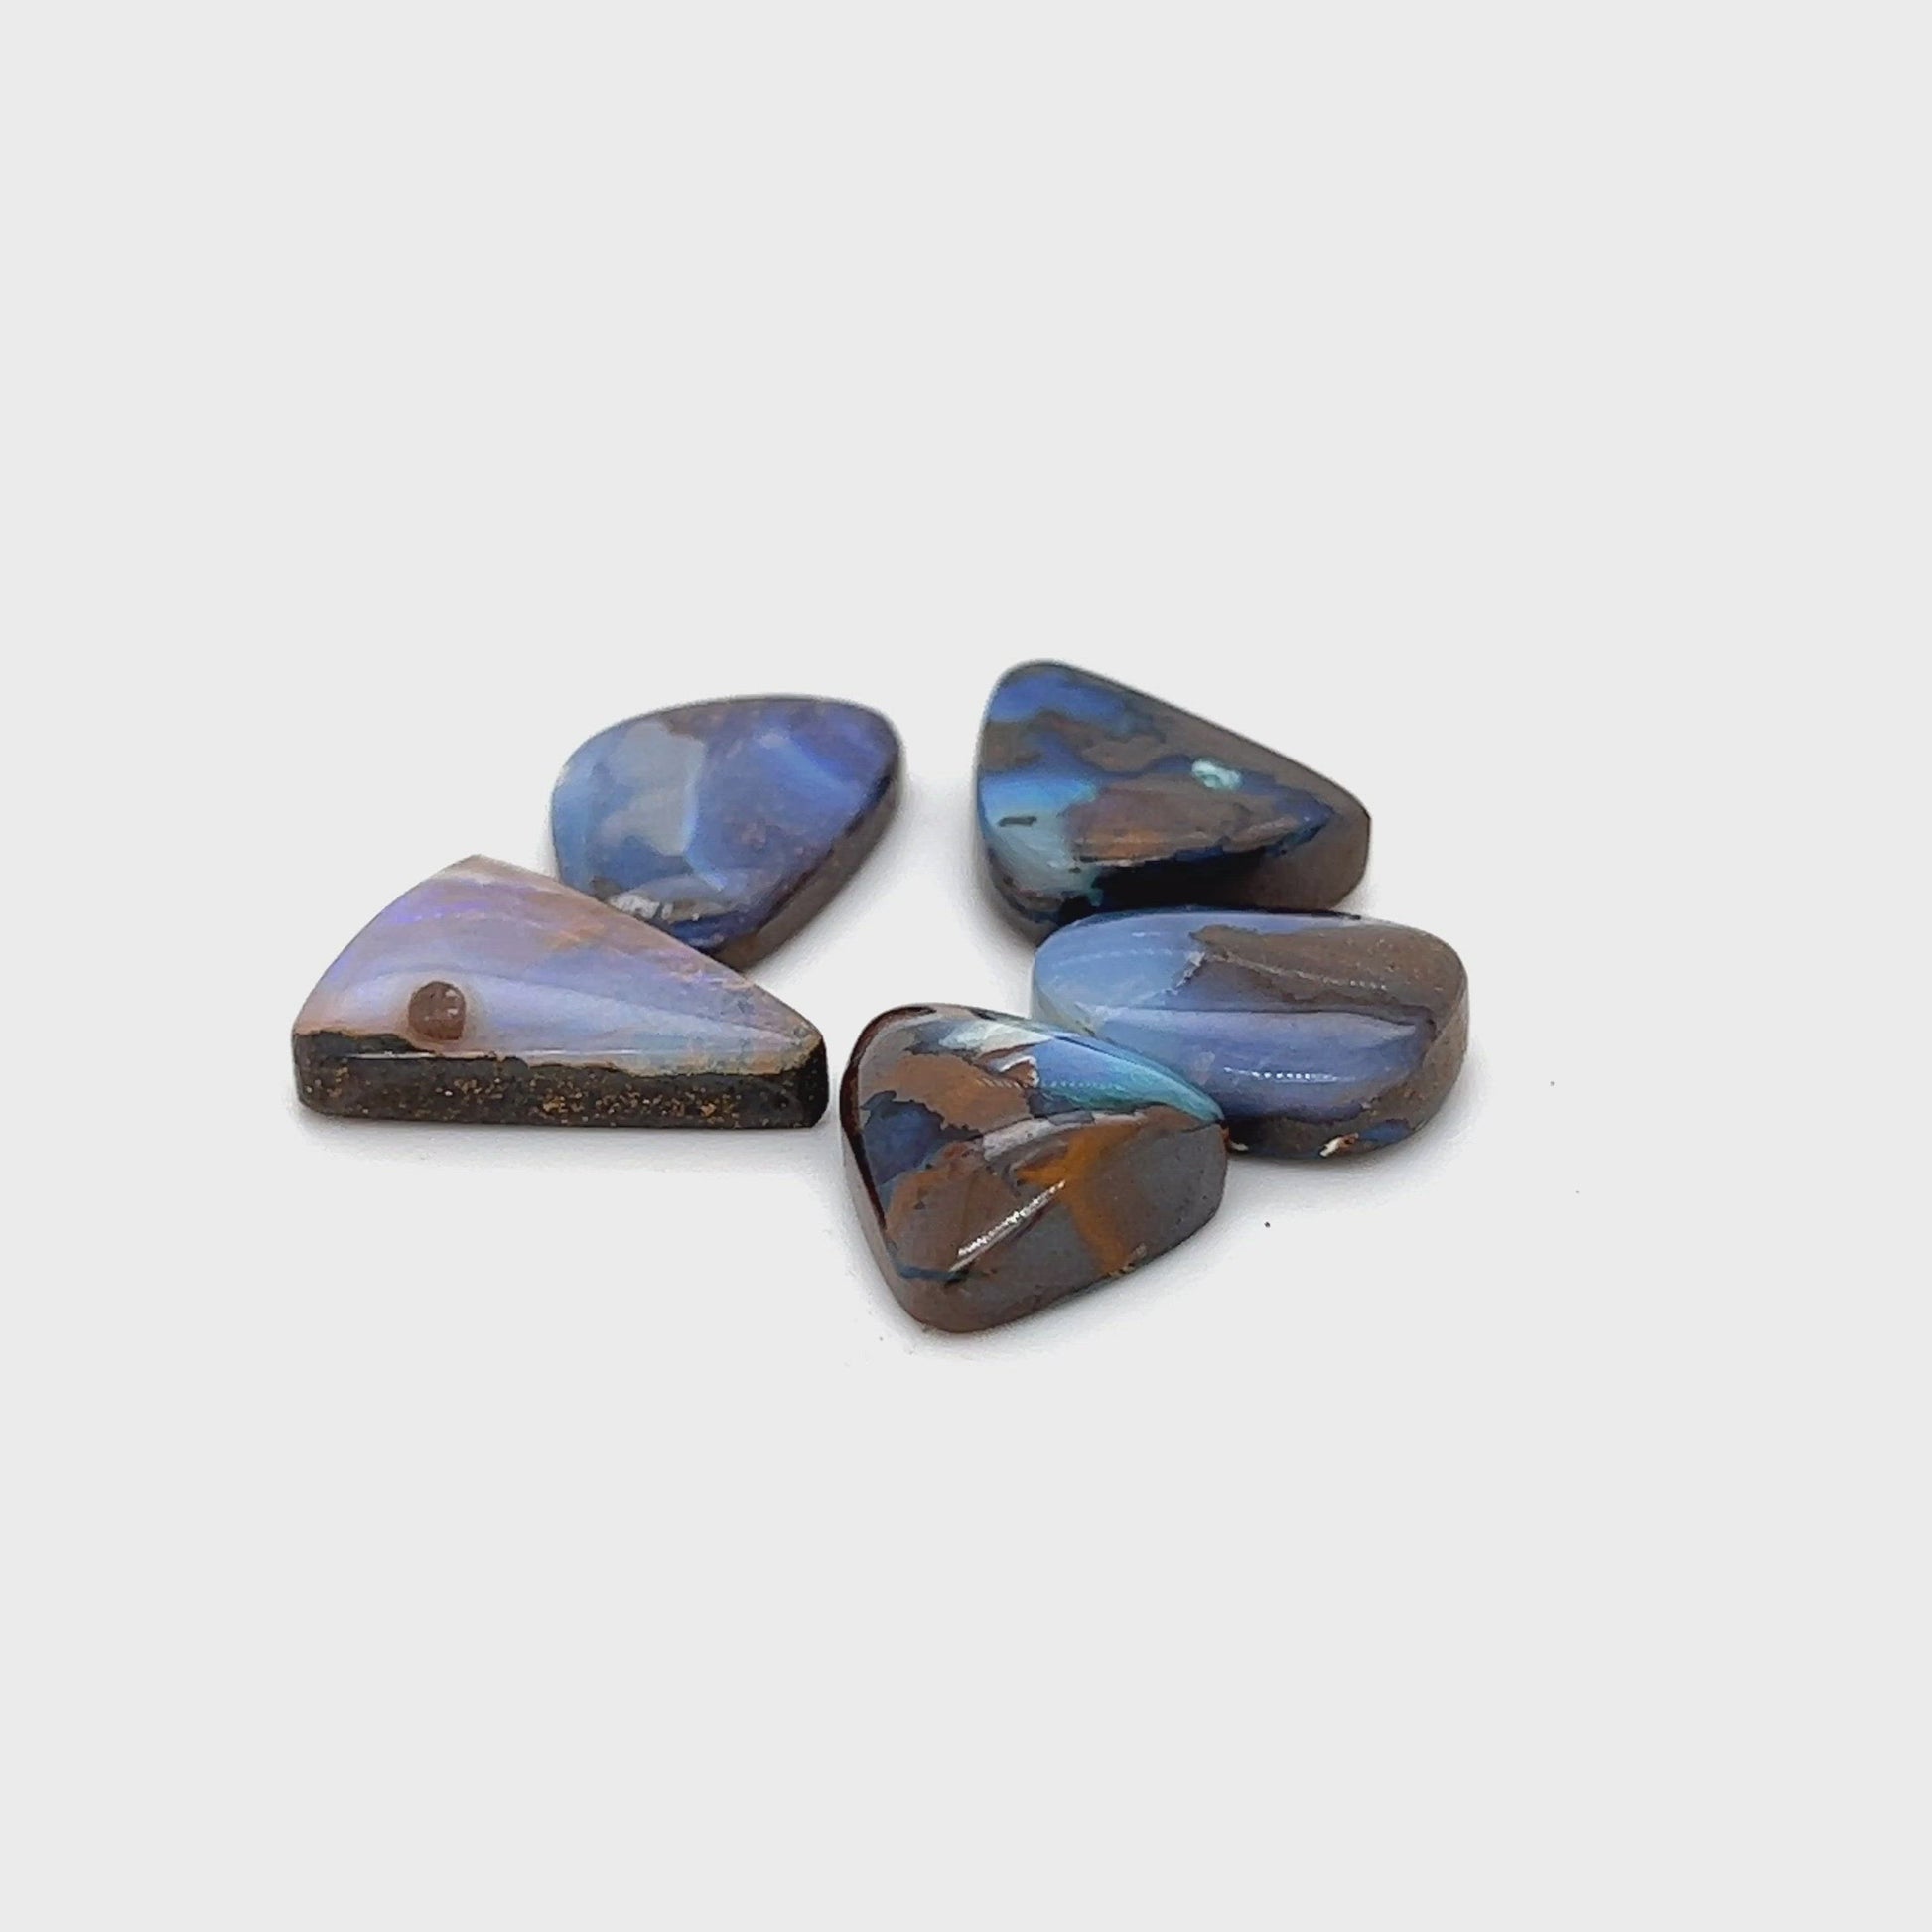 Great cut and polish on this bundle of five boulder opals. Perfect for rings or pendants.